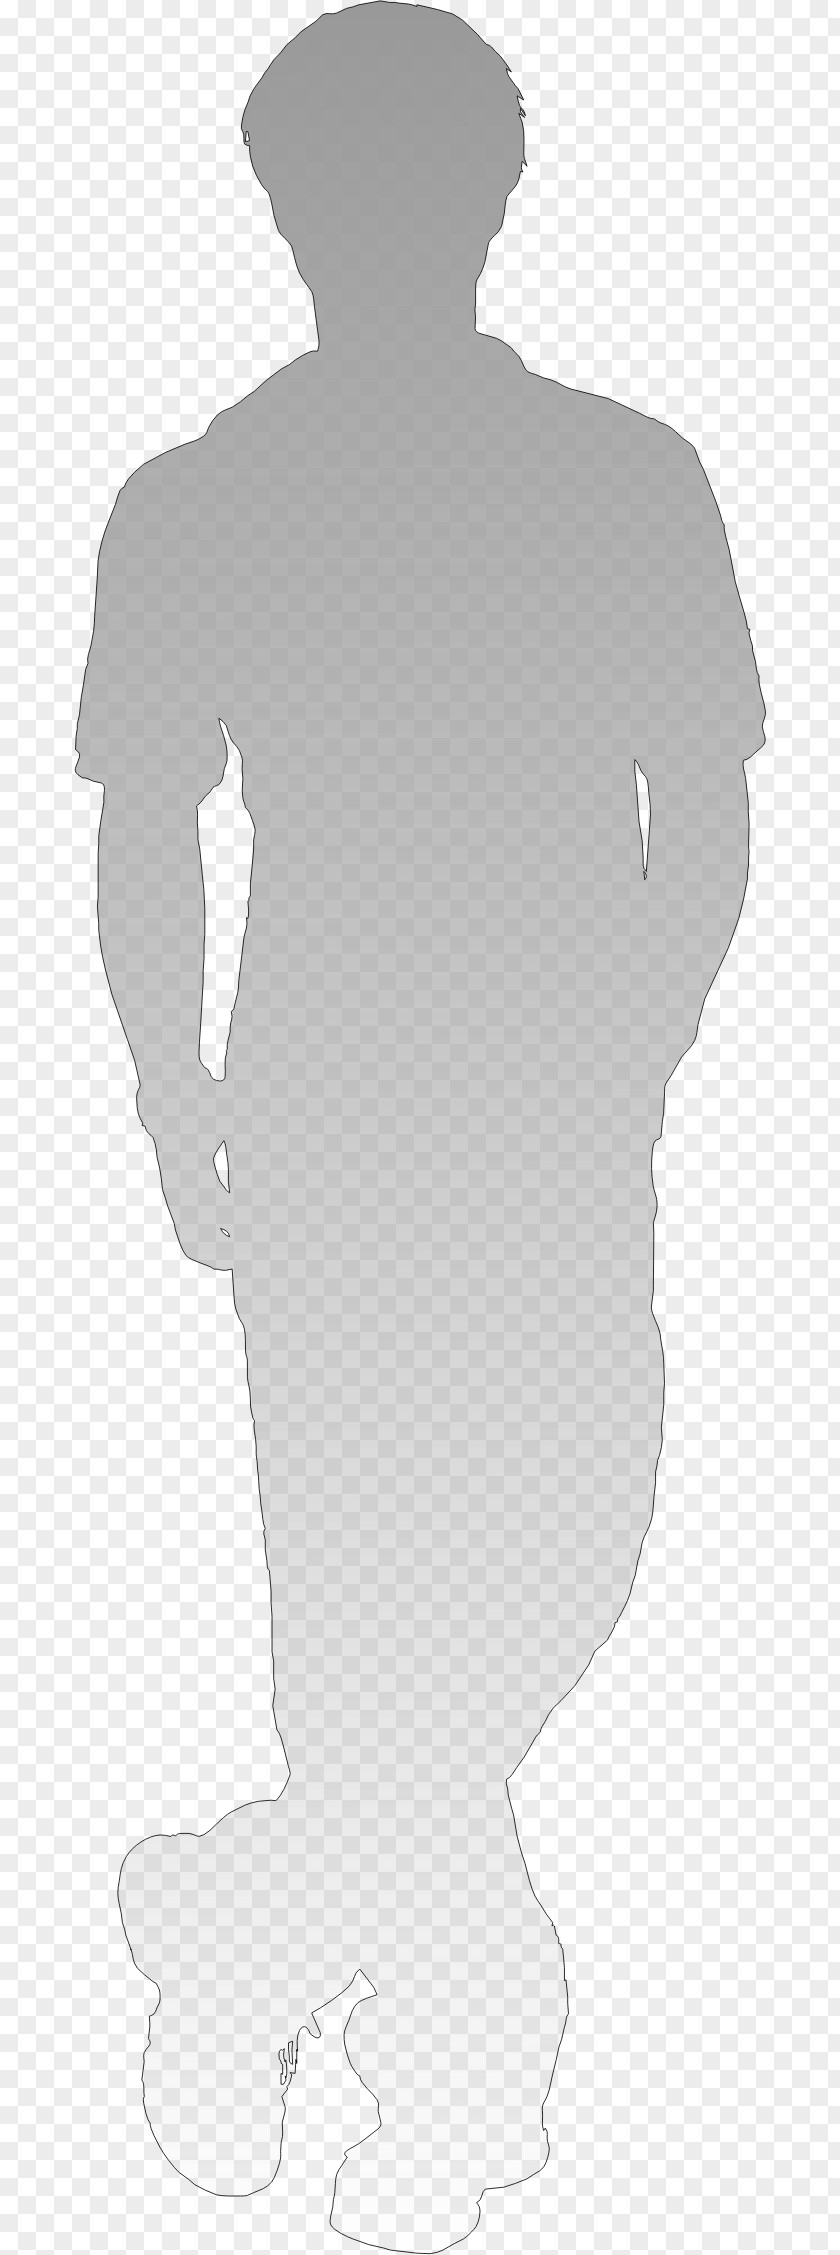 Shadow Person Silhouette Clip Art PNG